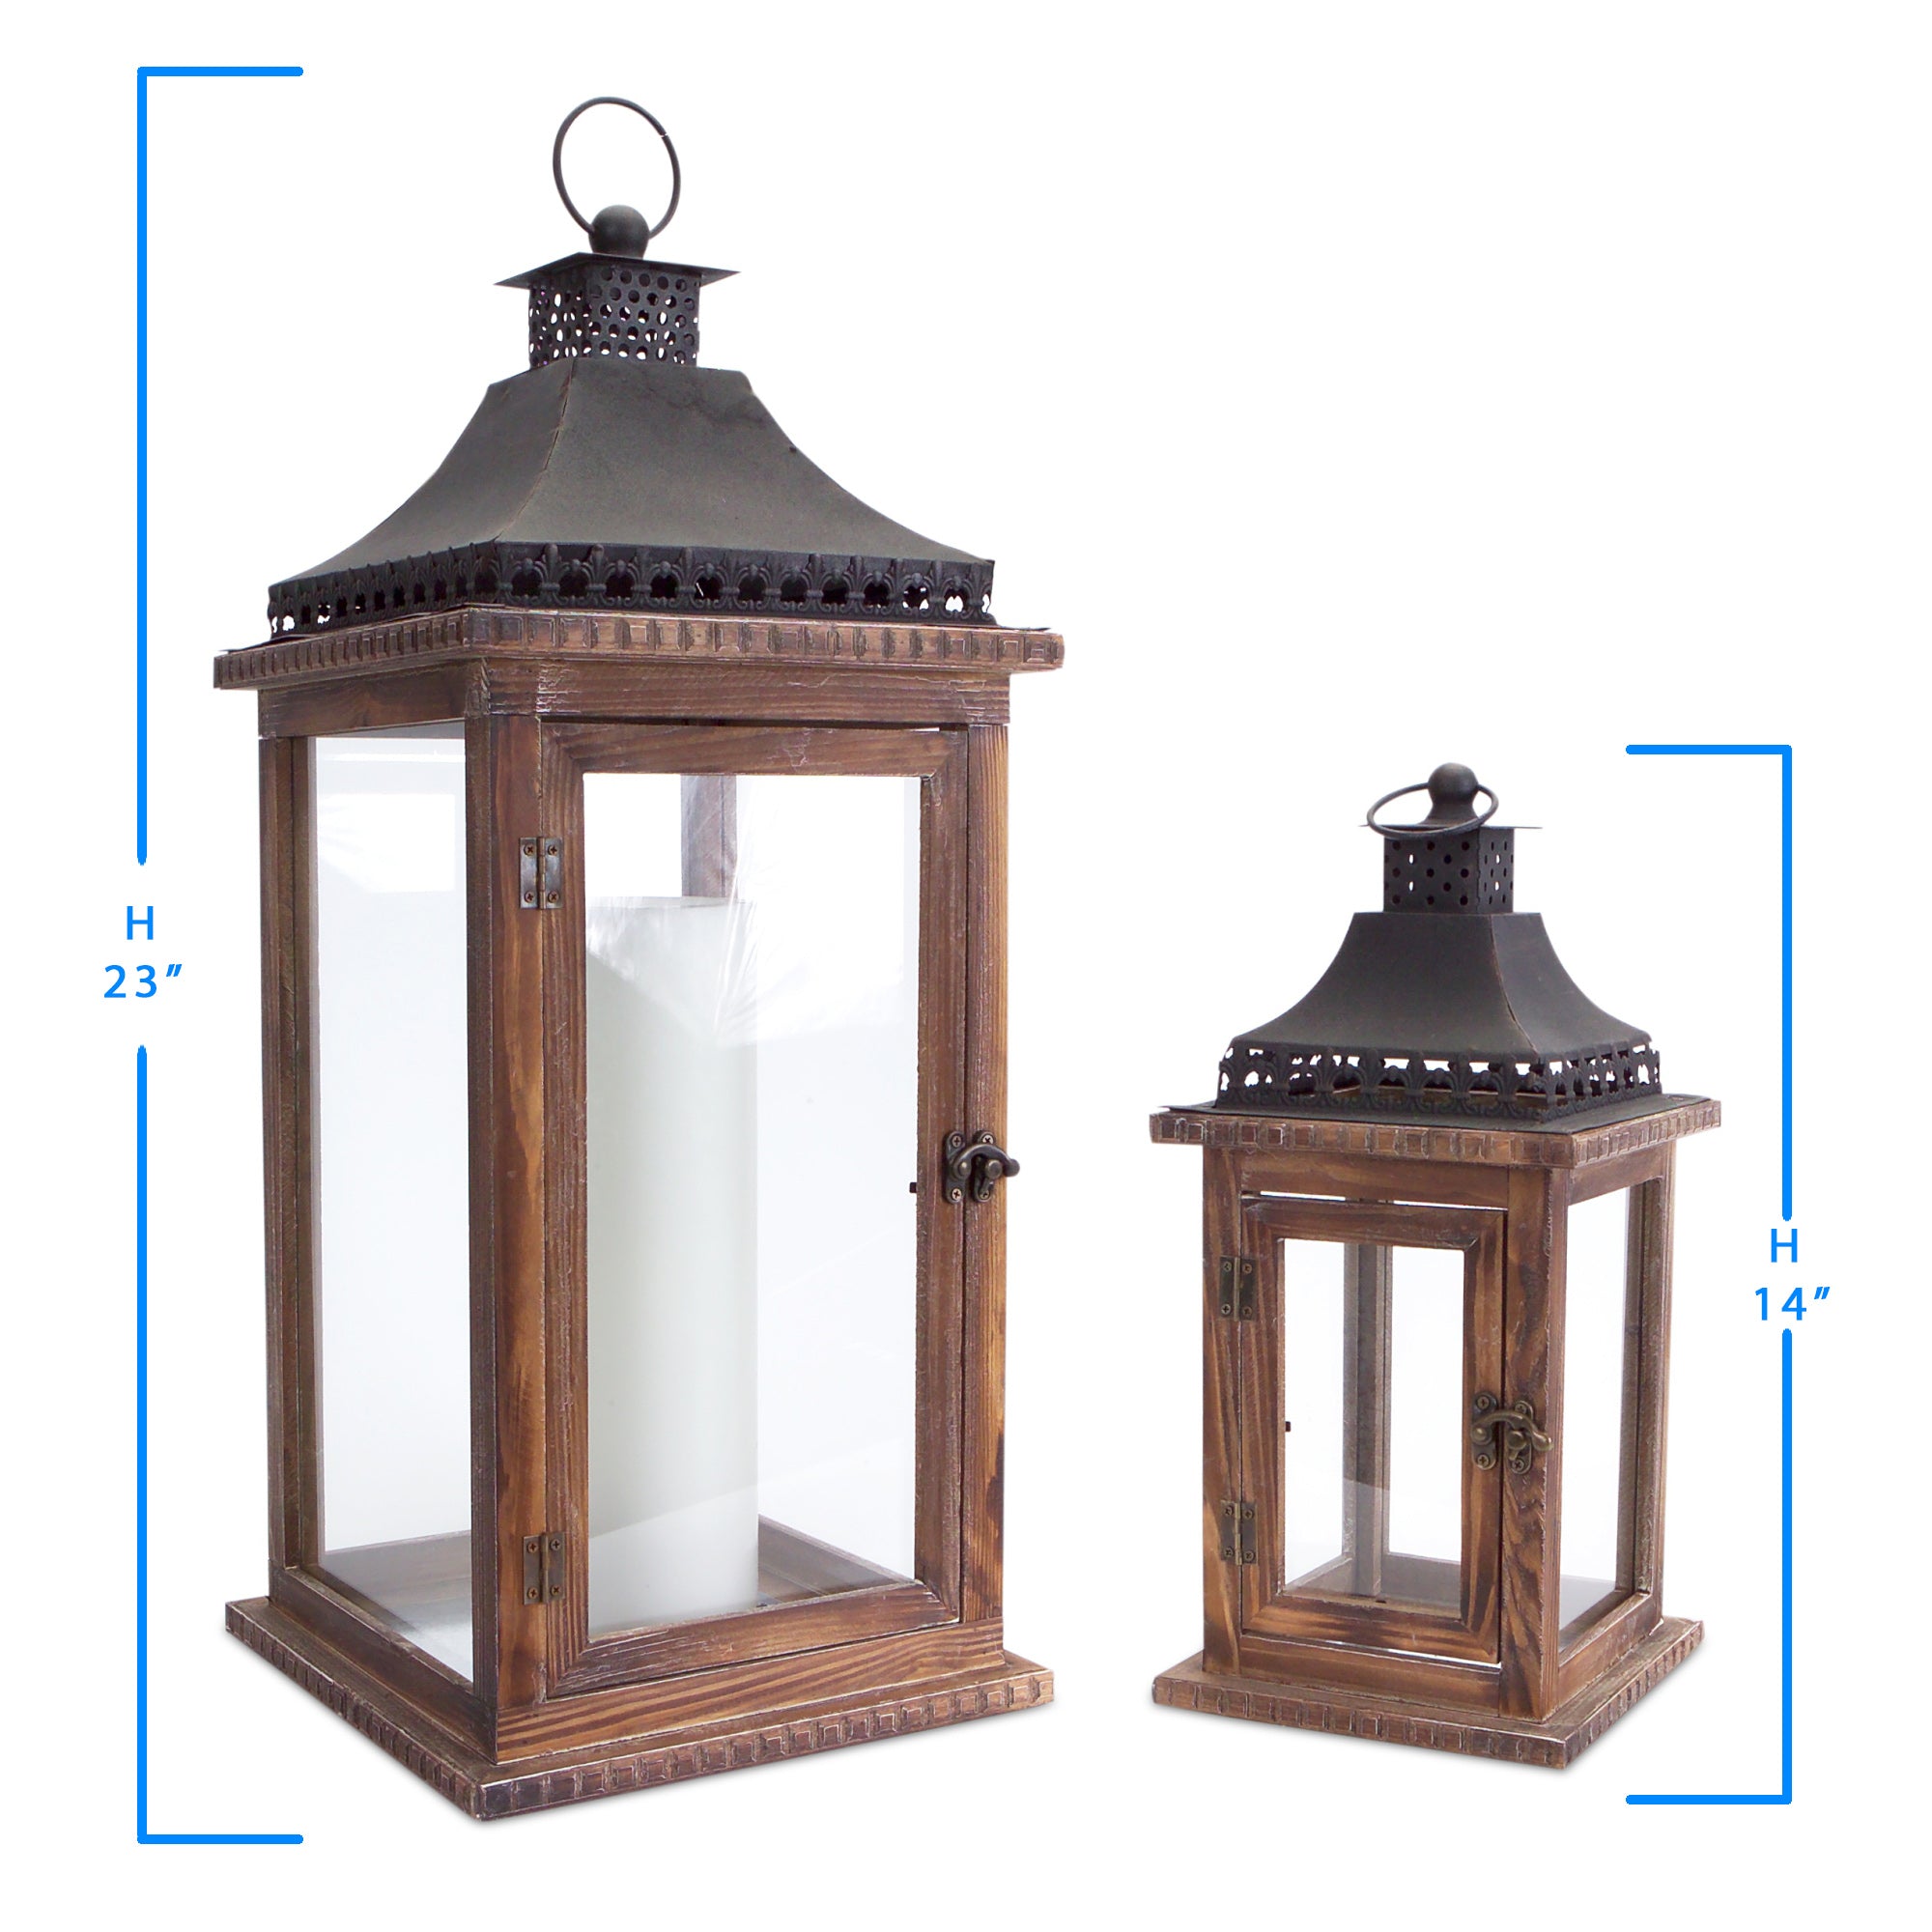 Set of Two Natural Iron Mirrored Floor Lantern Candle Holders